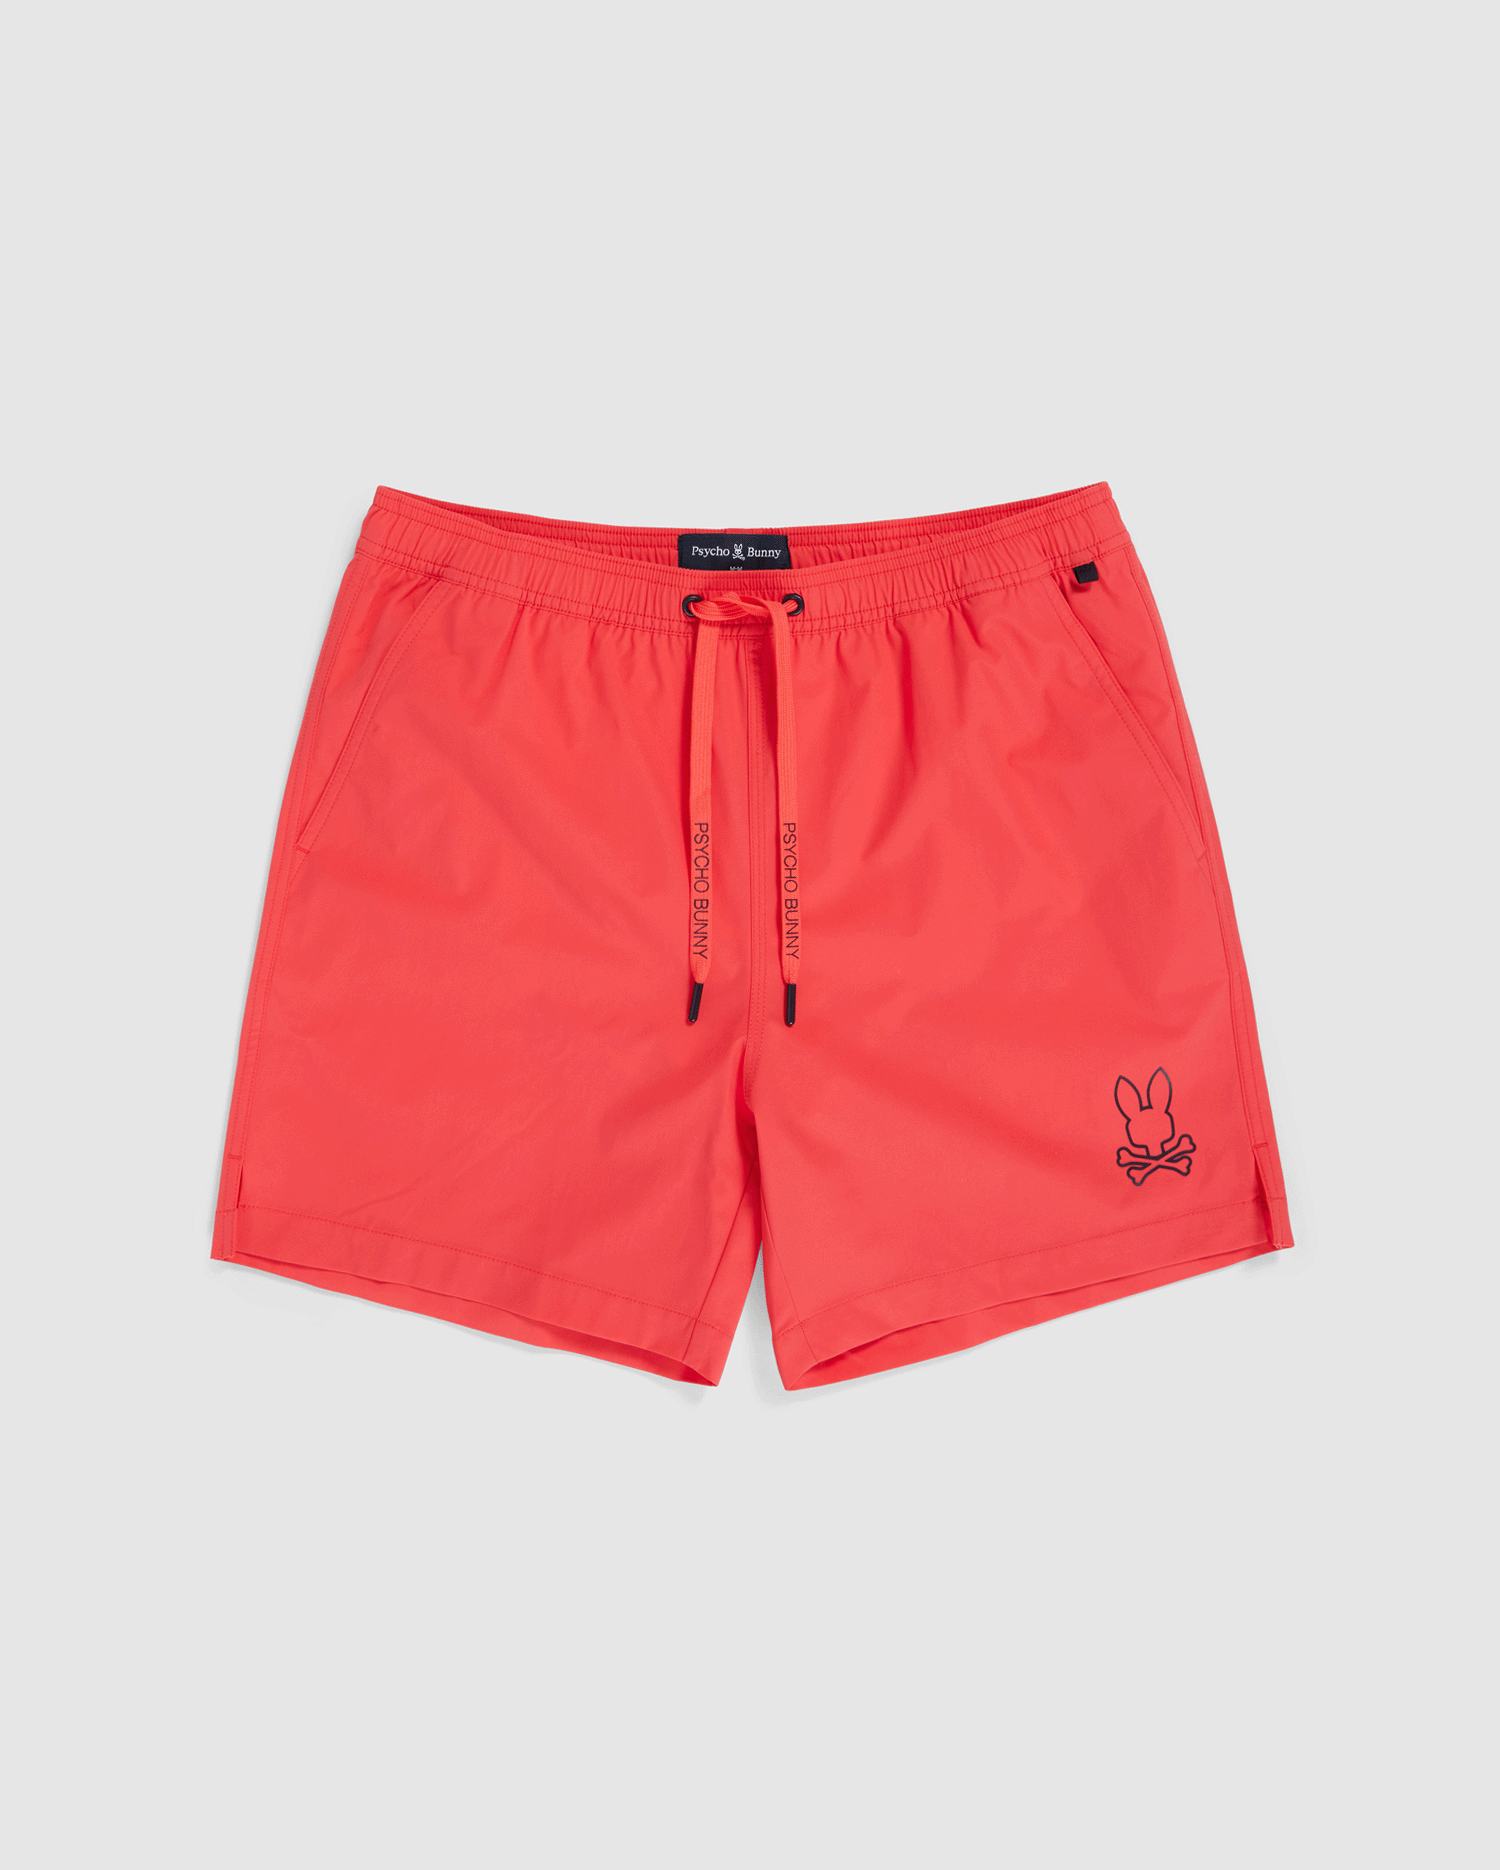 Bright red Psycho Bunny MENS PARKER HYDROCHROMIC SWIM TRUNK - B6W646C200 with an elastic waistband and a drawstring. The trunks feature a small black bunny logo on the left thigh and additional branding on the drawstring. Made from quick-dry material, the lightweight fabric is perfect for swimming.